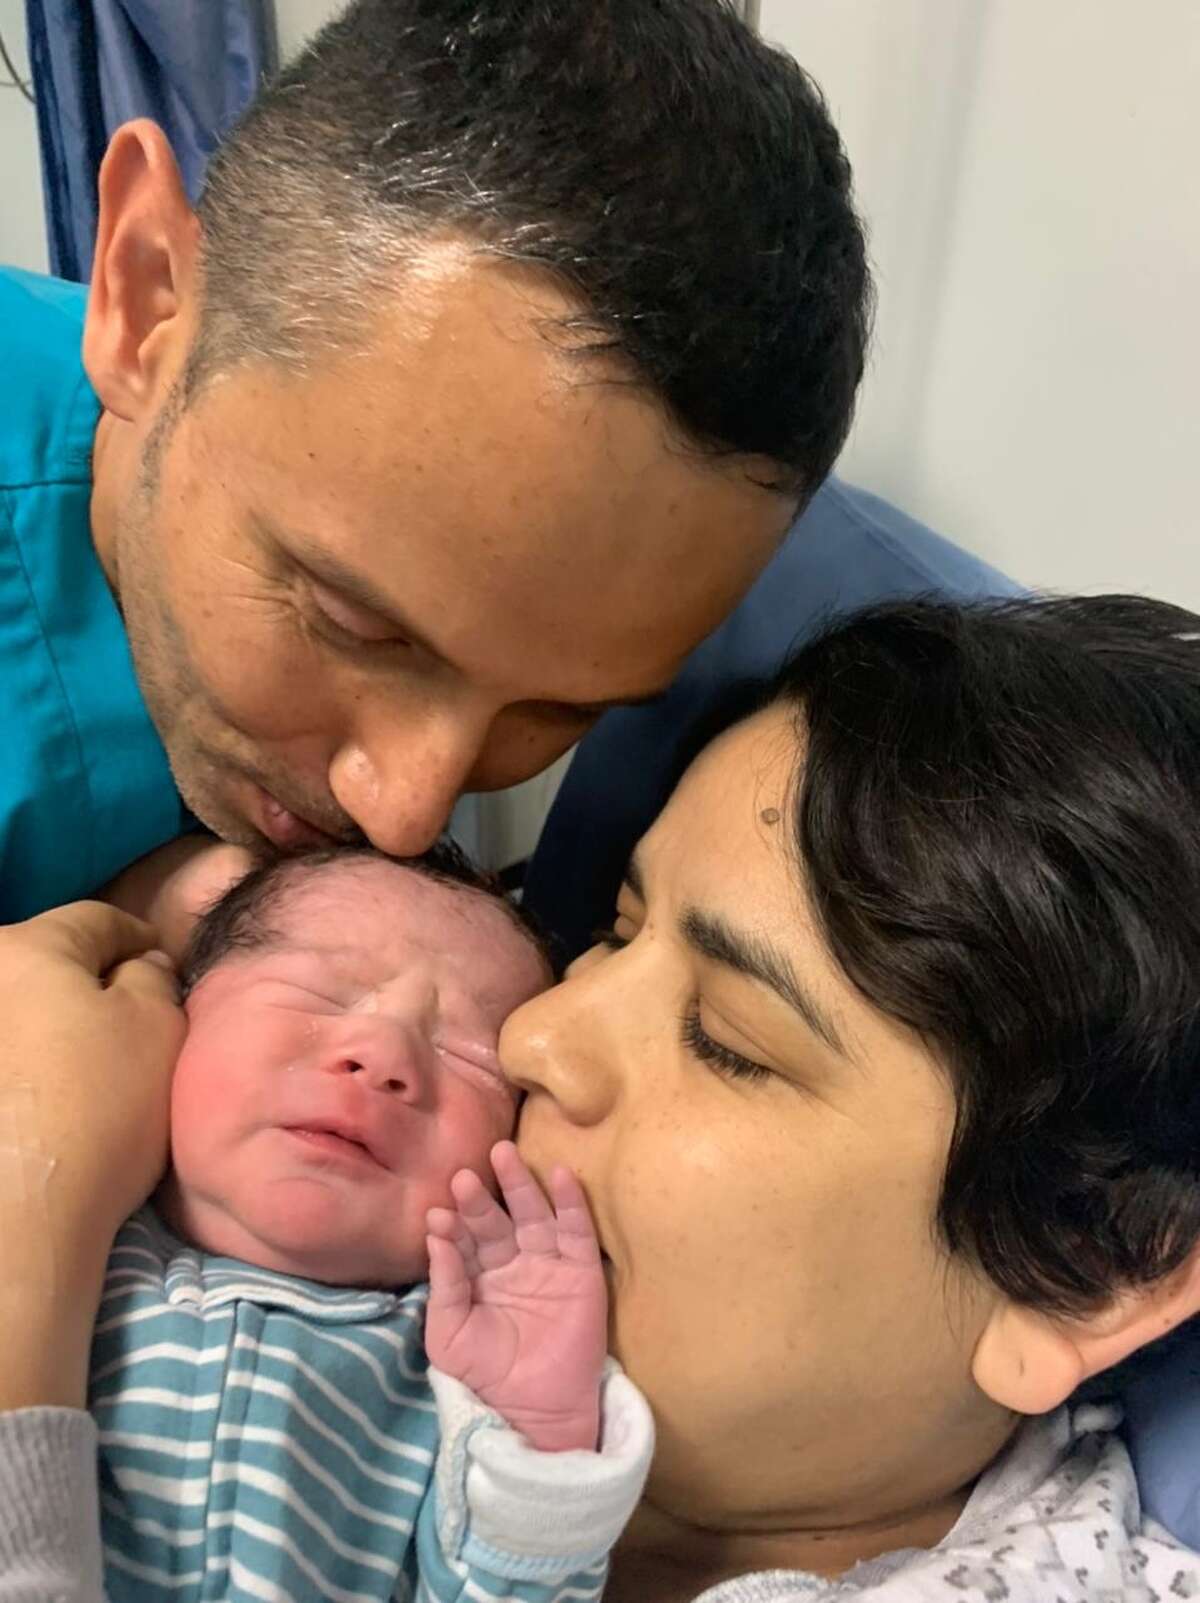 Catherine Castro and Jorge Carvajal flew from their home in Costa Rica to Texas Children's Hospital for a life-saving heart surgery for their son, Arturo, when he was less than two weeks old.